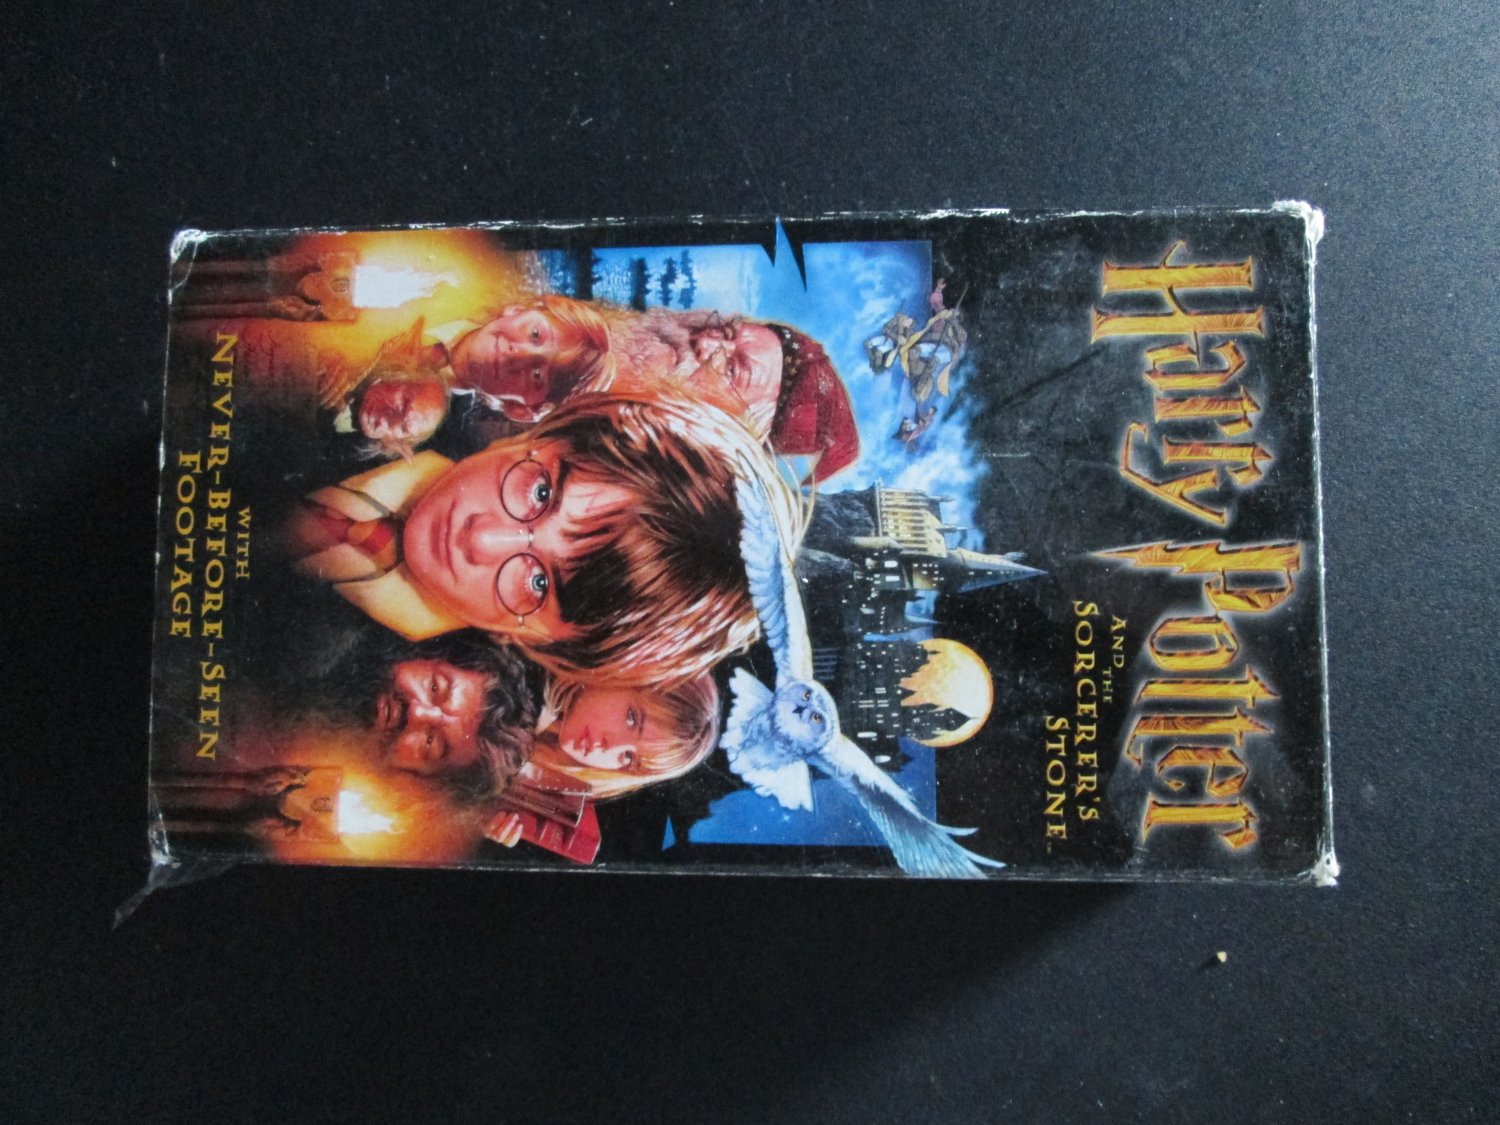 Harry Potter and the Sorcerer's Stone VHS